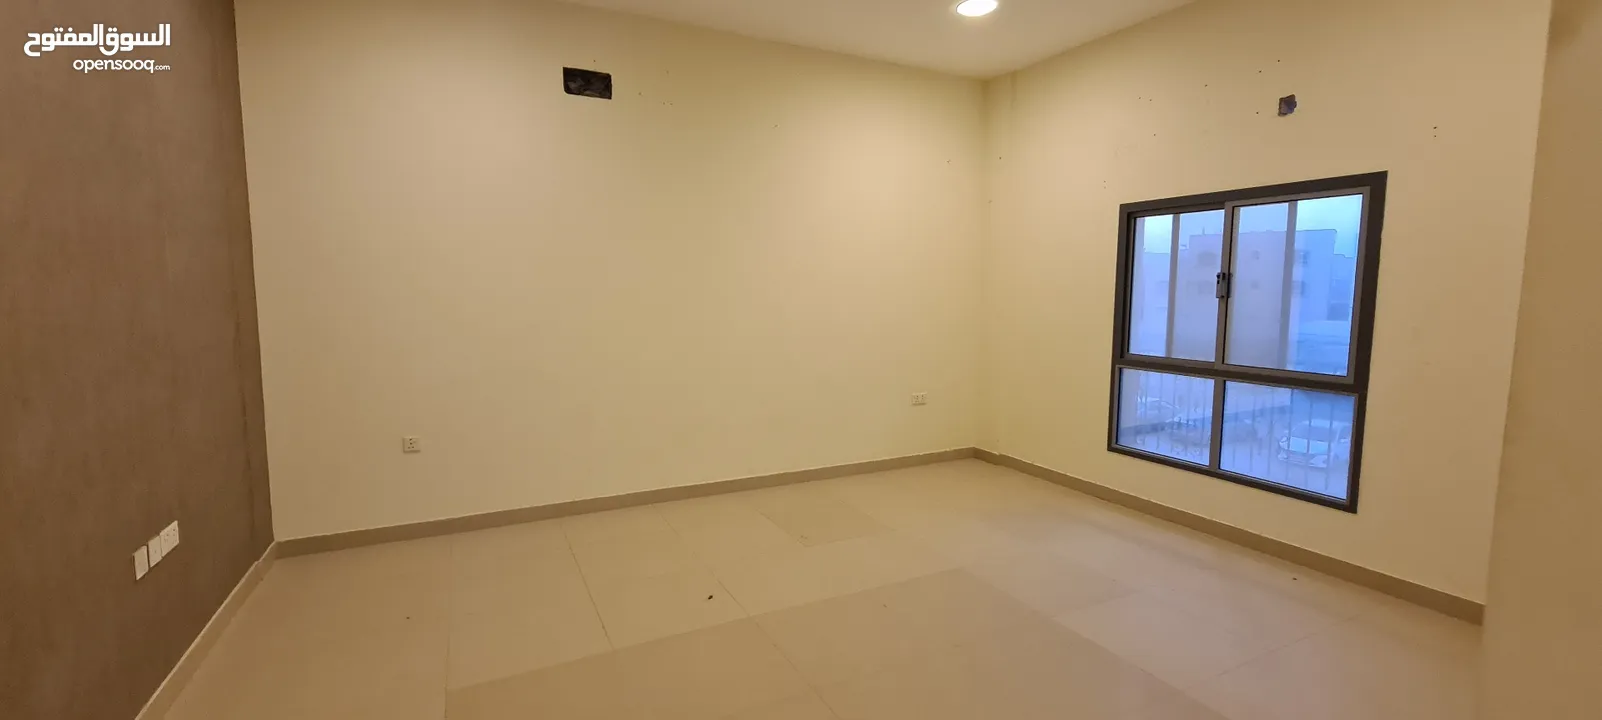 available flat in janabyia three bedrooms with EWA